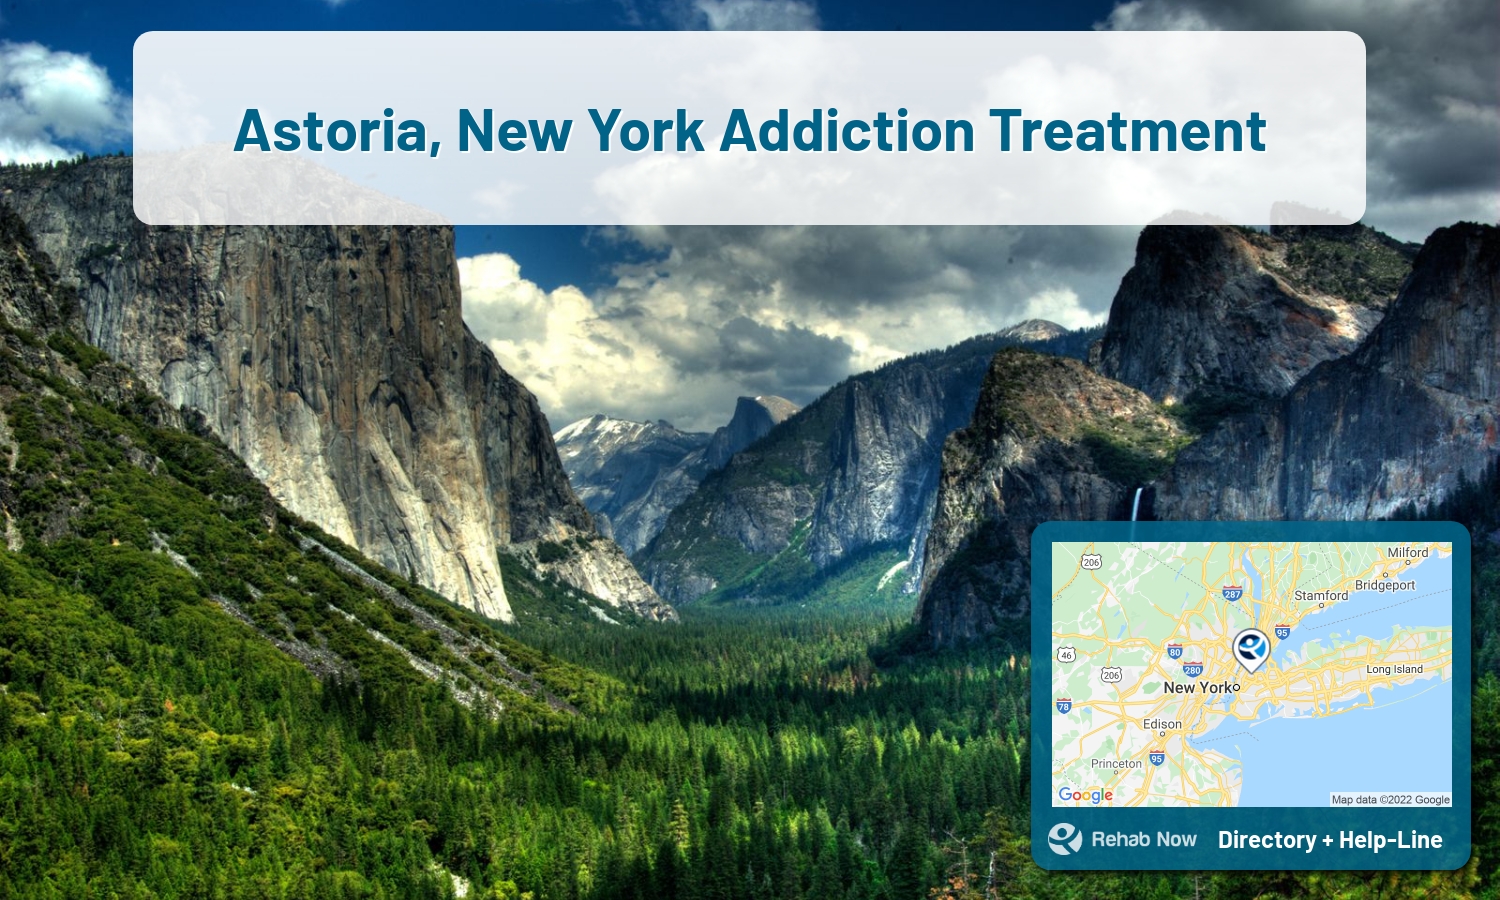 Our experts can help you find treatment now in Astoria, New York. We list drug rehab and alcohol centers in New York.